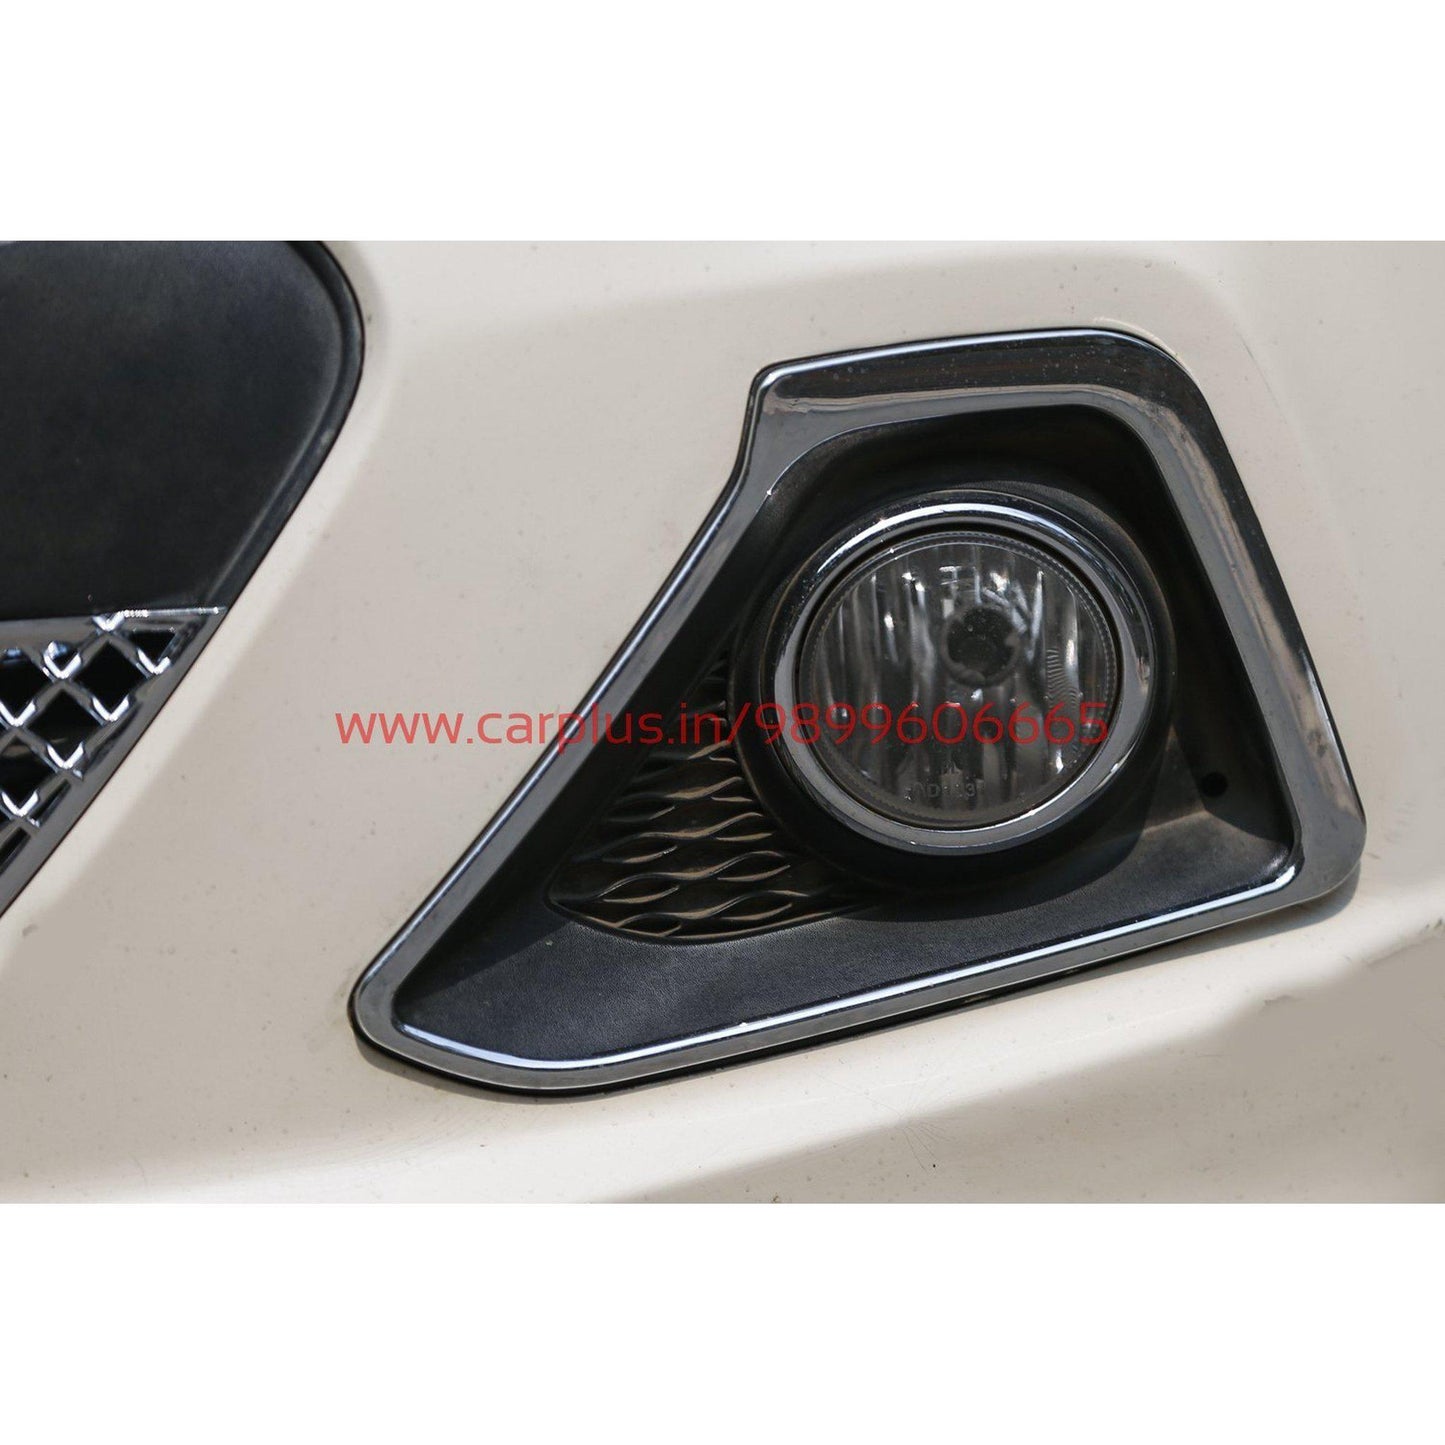 Lovely Wholesale i10 fog lamp cover Available For Any Budget 